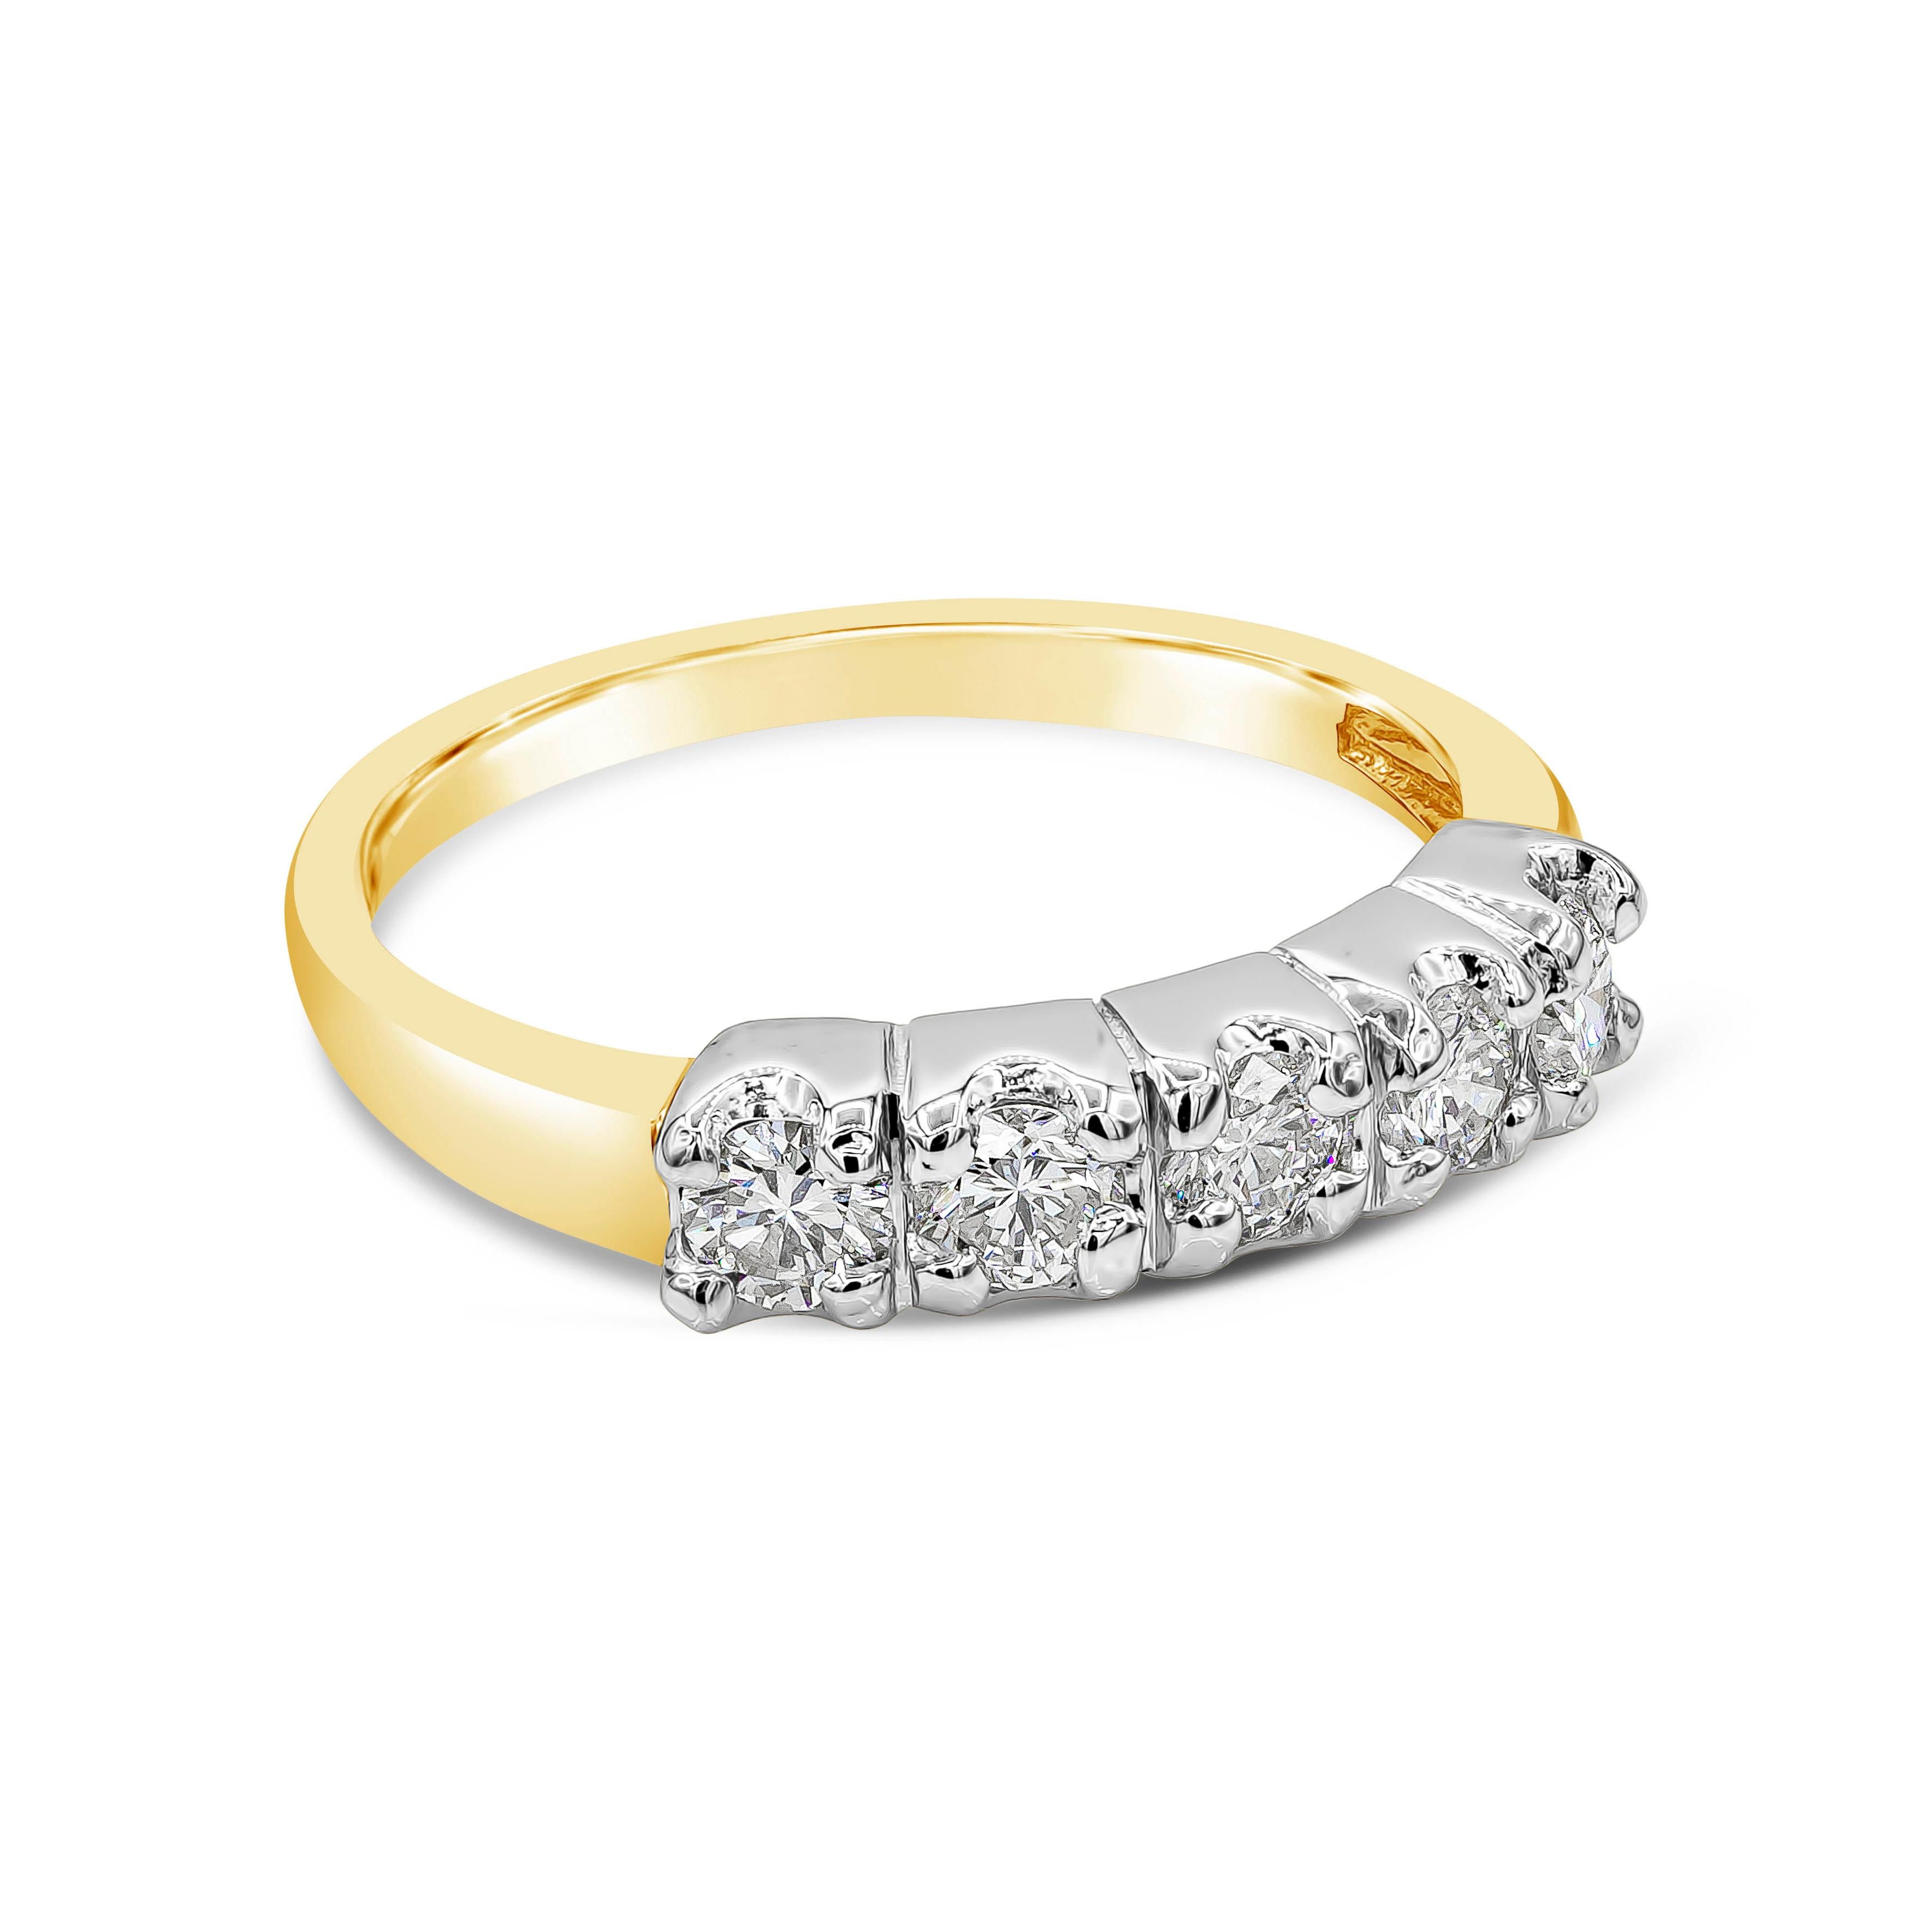 A uniquely-designed five-stone wedding band showcasing five round brilliant diamonds, each set in a classic four-prong basket setting made in 14k white gold. Diamonds weigh 0.65 carats total and are approximately H color, VS clarity. Band made in